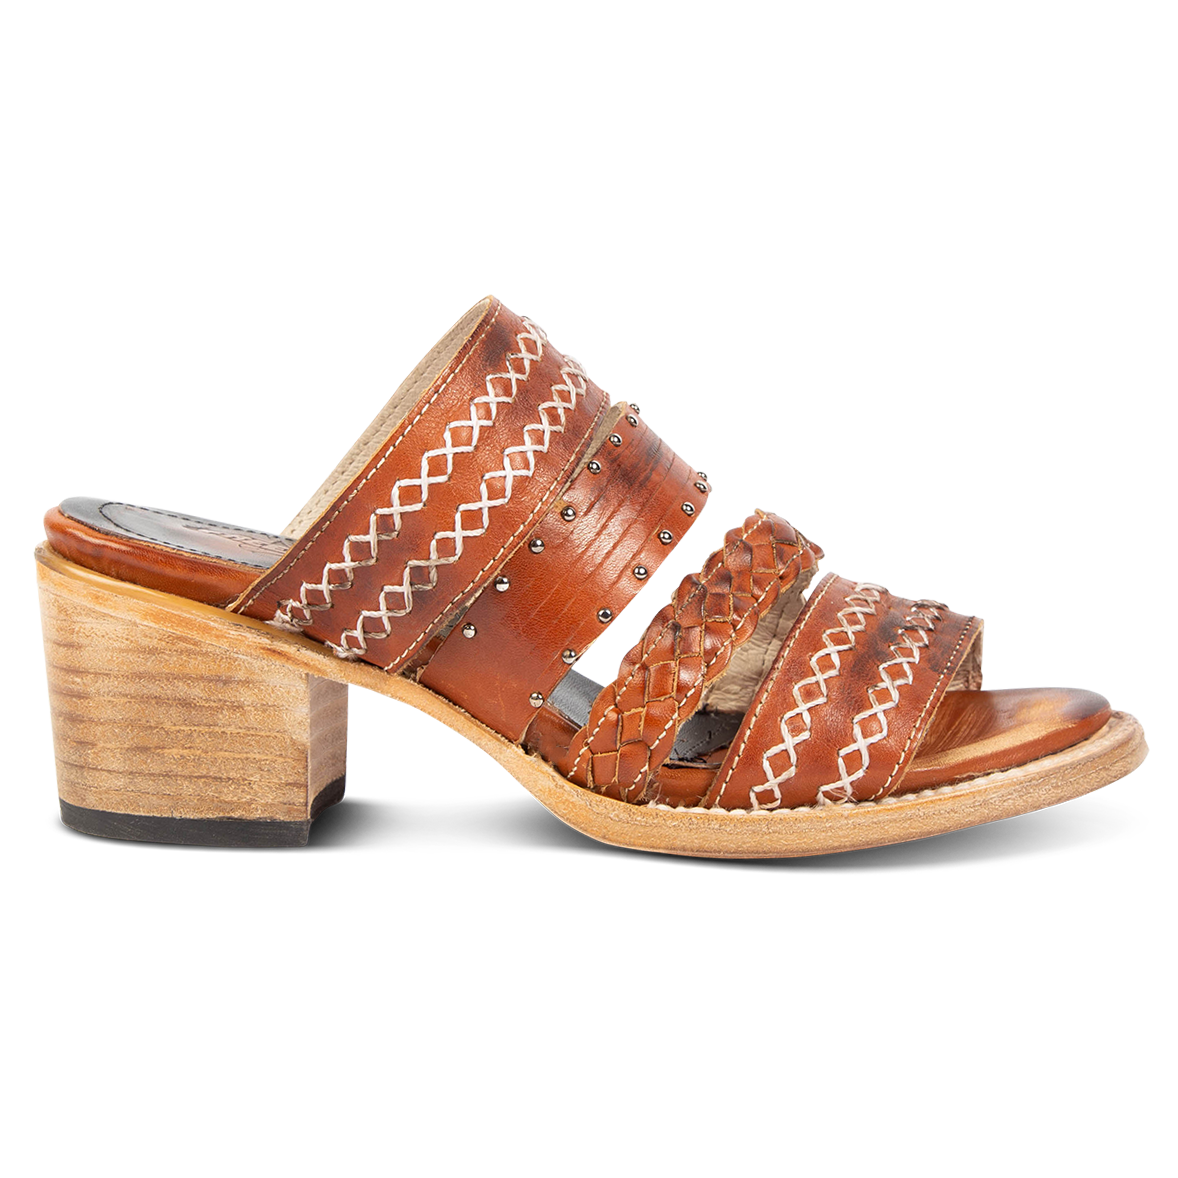 FREEBIRD women's Albuquerque whiskey open-toe slip-on sandal with braided and stitch detailed straps